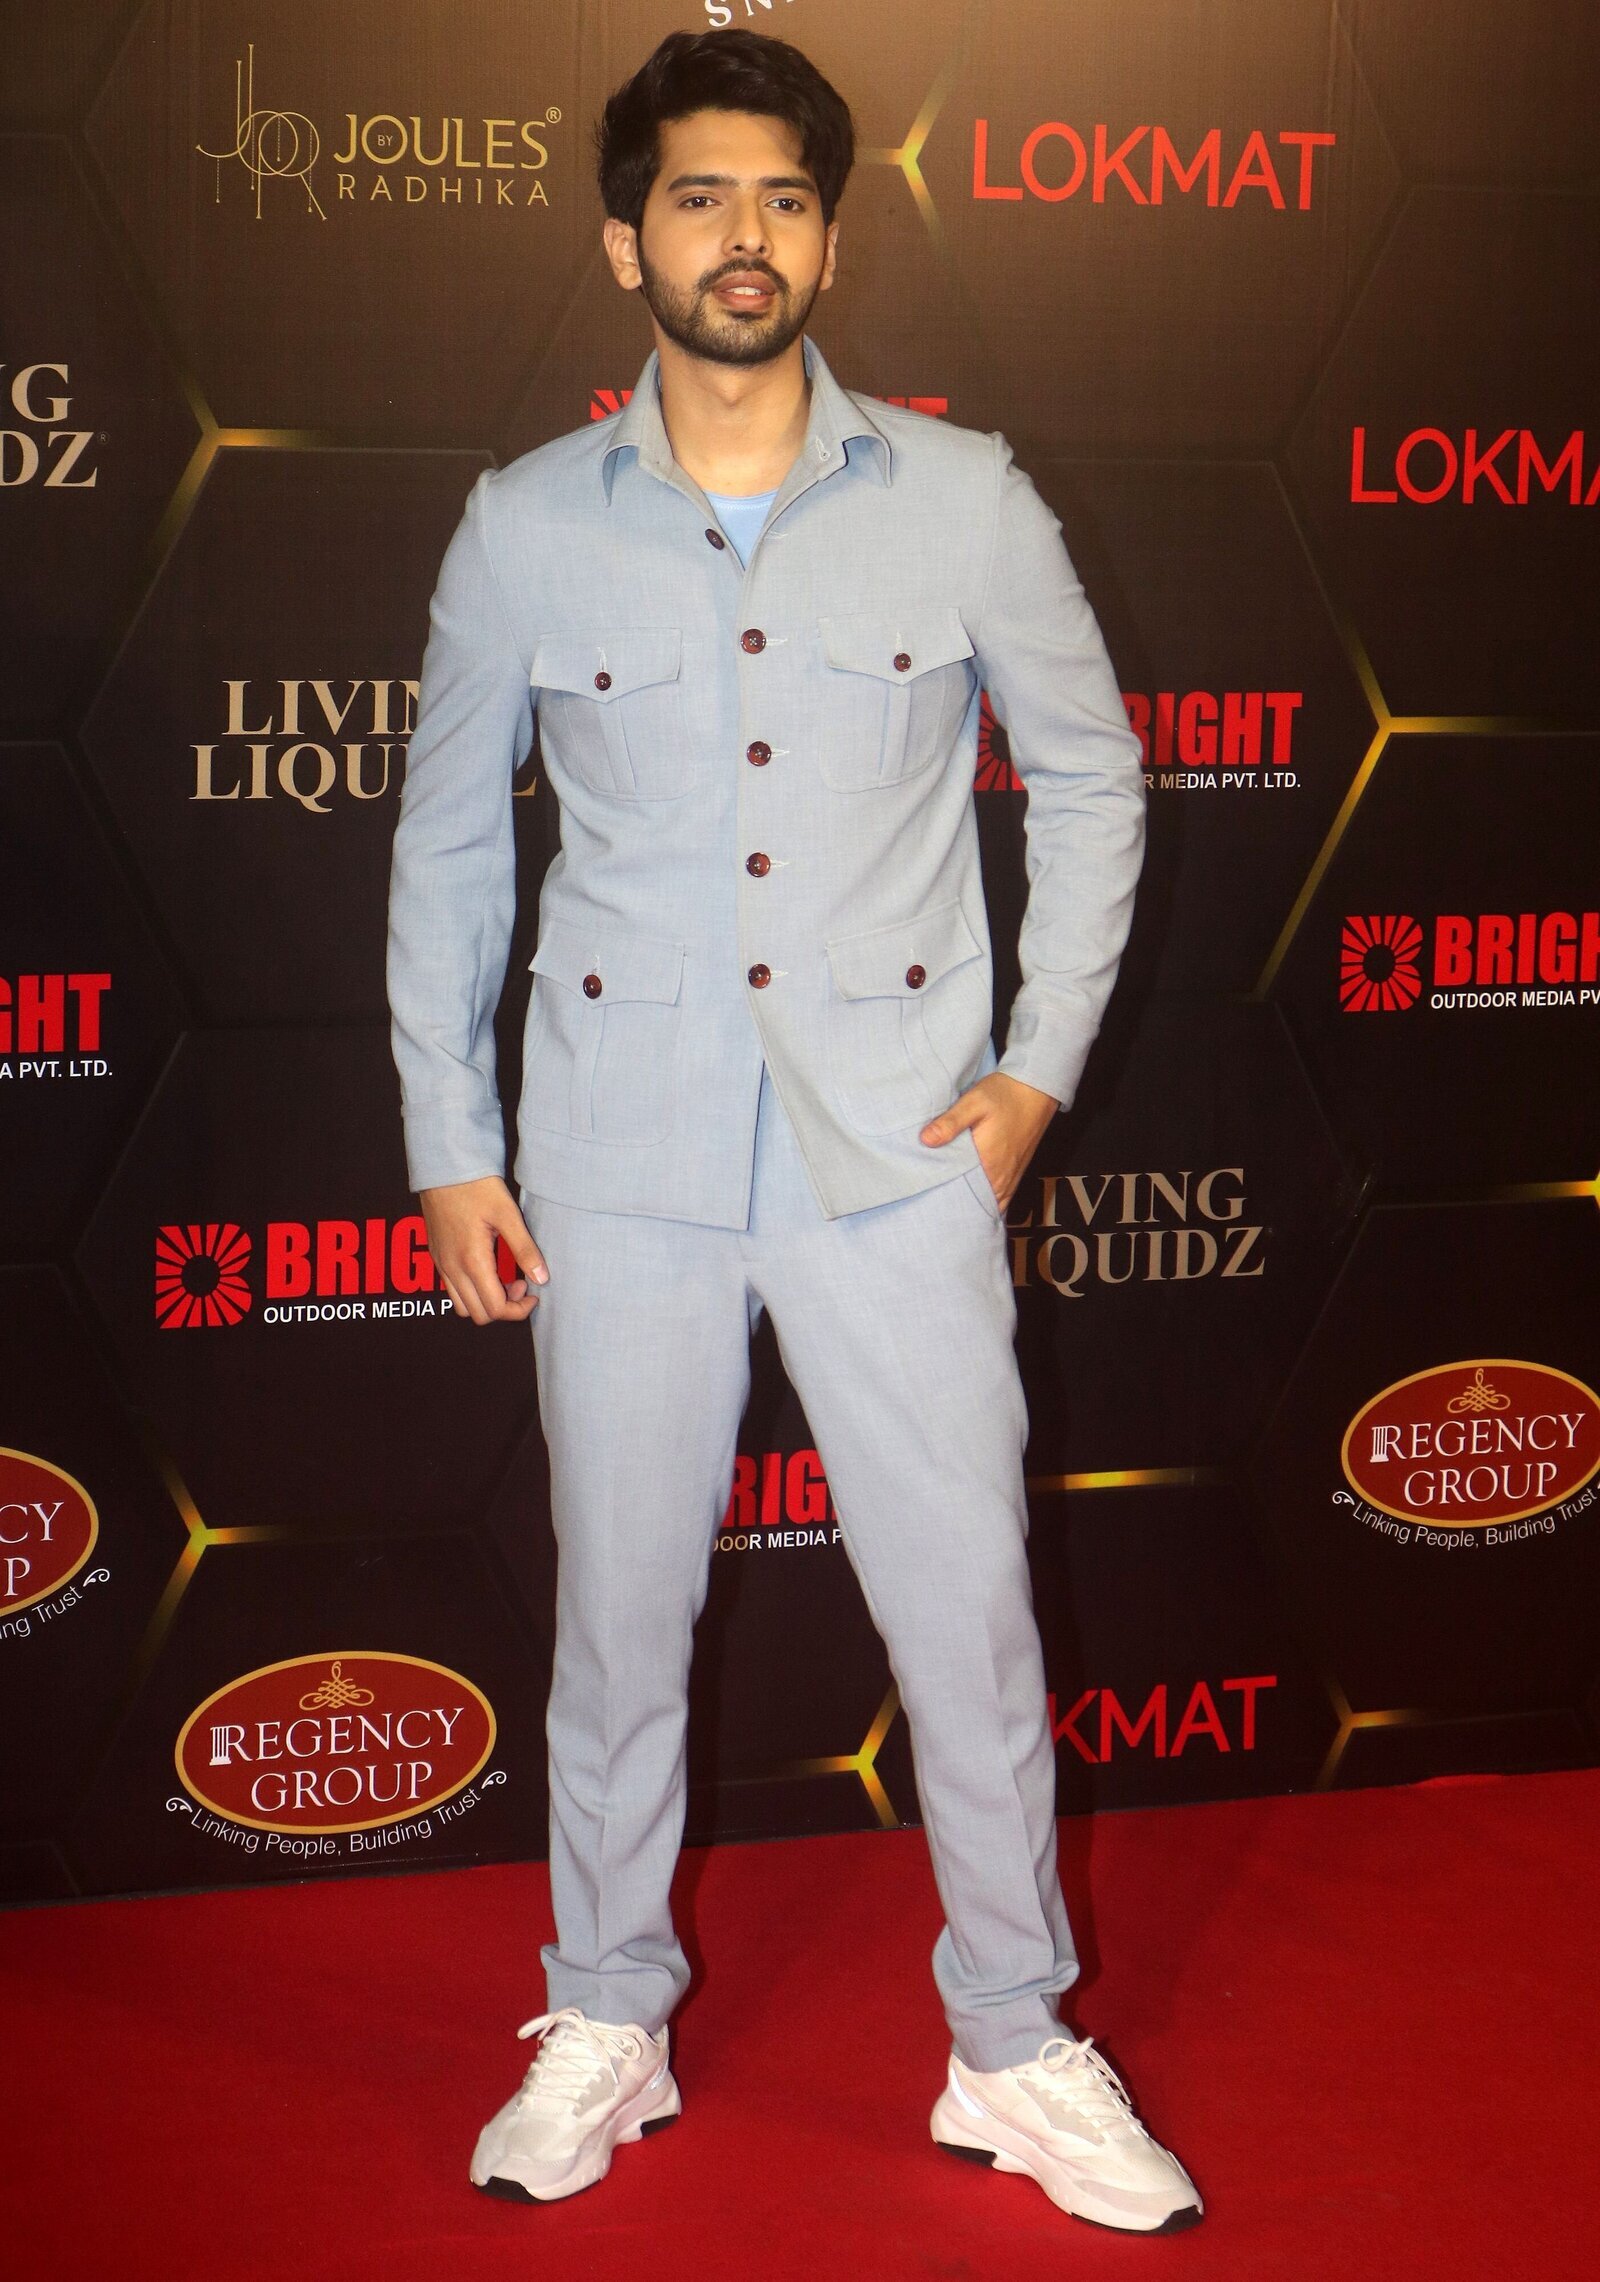 Armaan Malik - Photos: Celebs At The Lokmat Most Stylish Awards 2021 | Picture 1845783